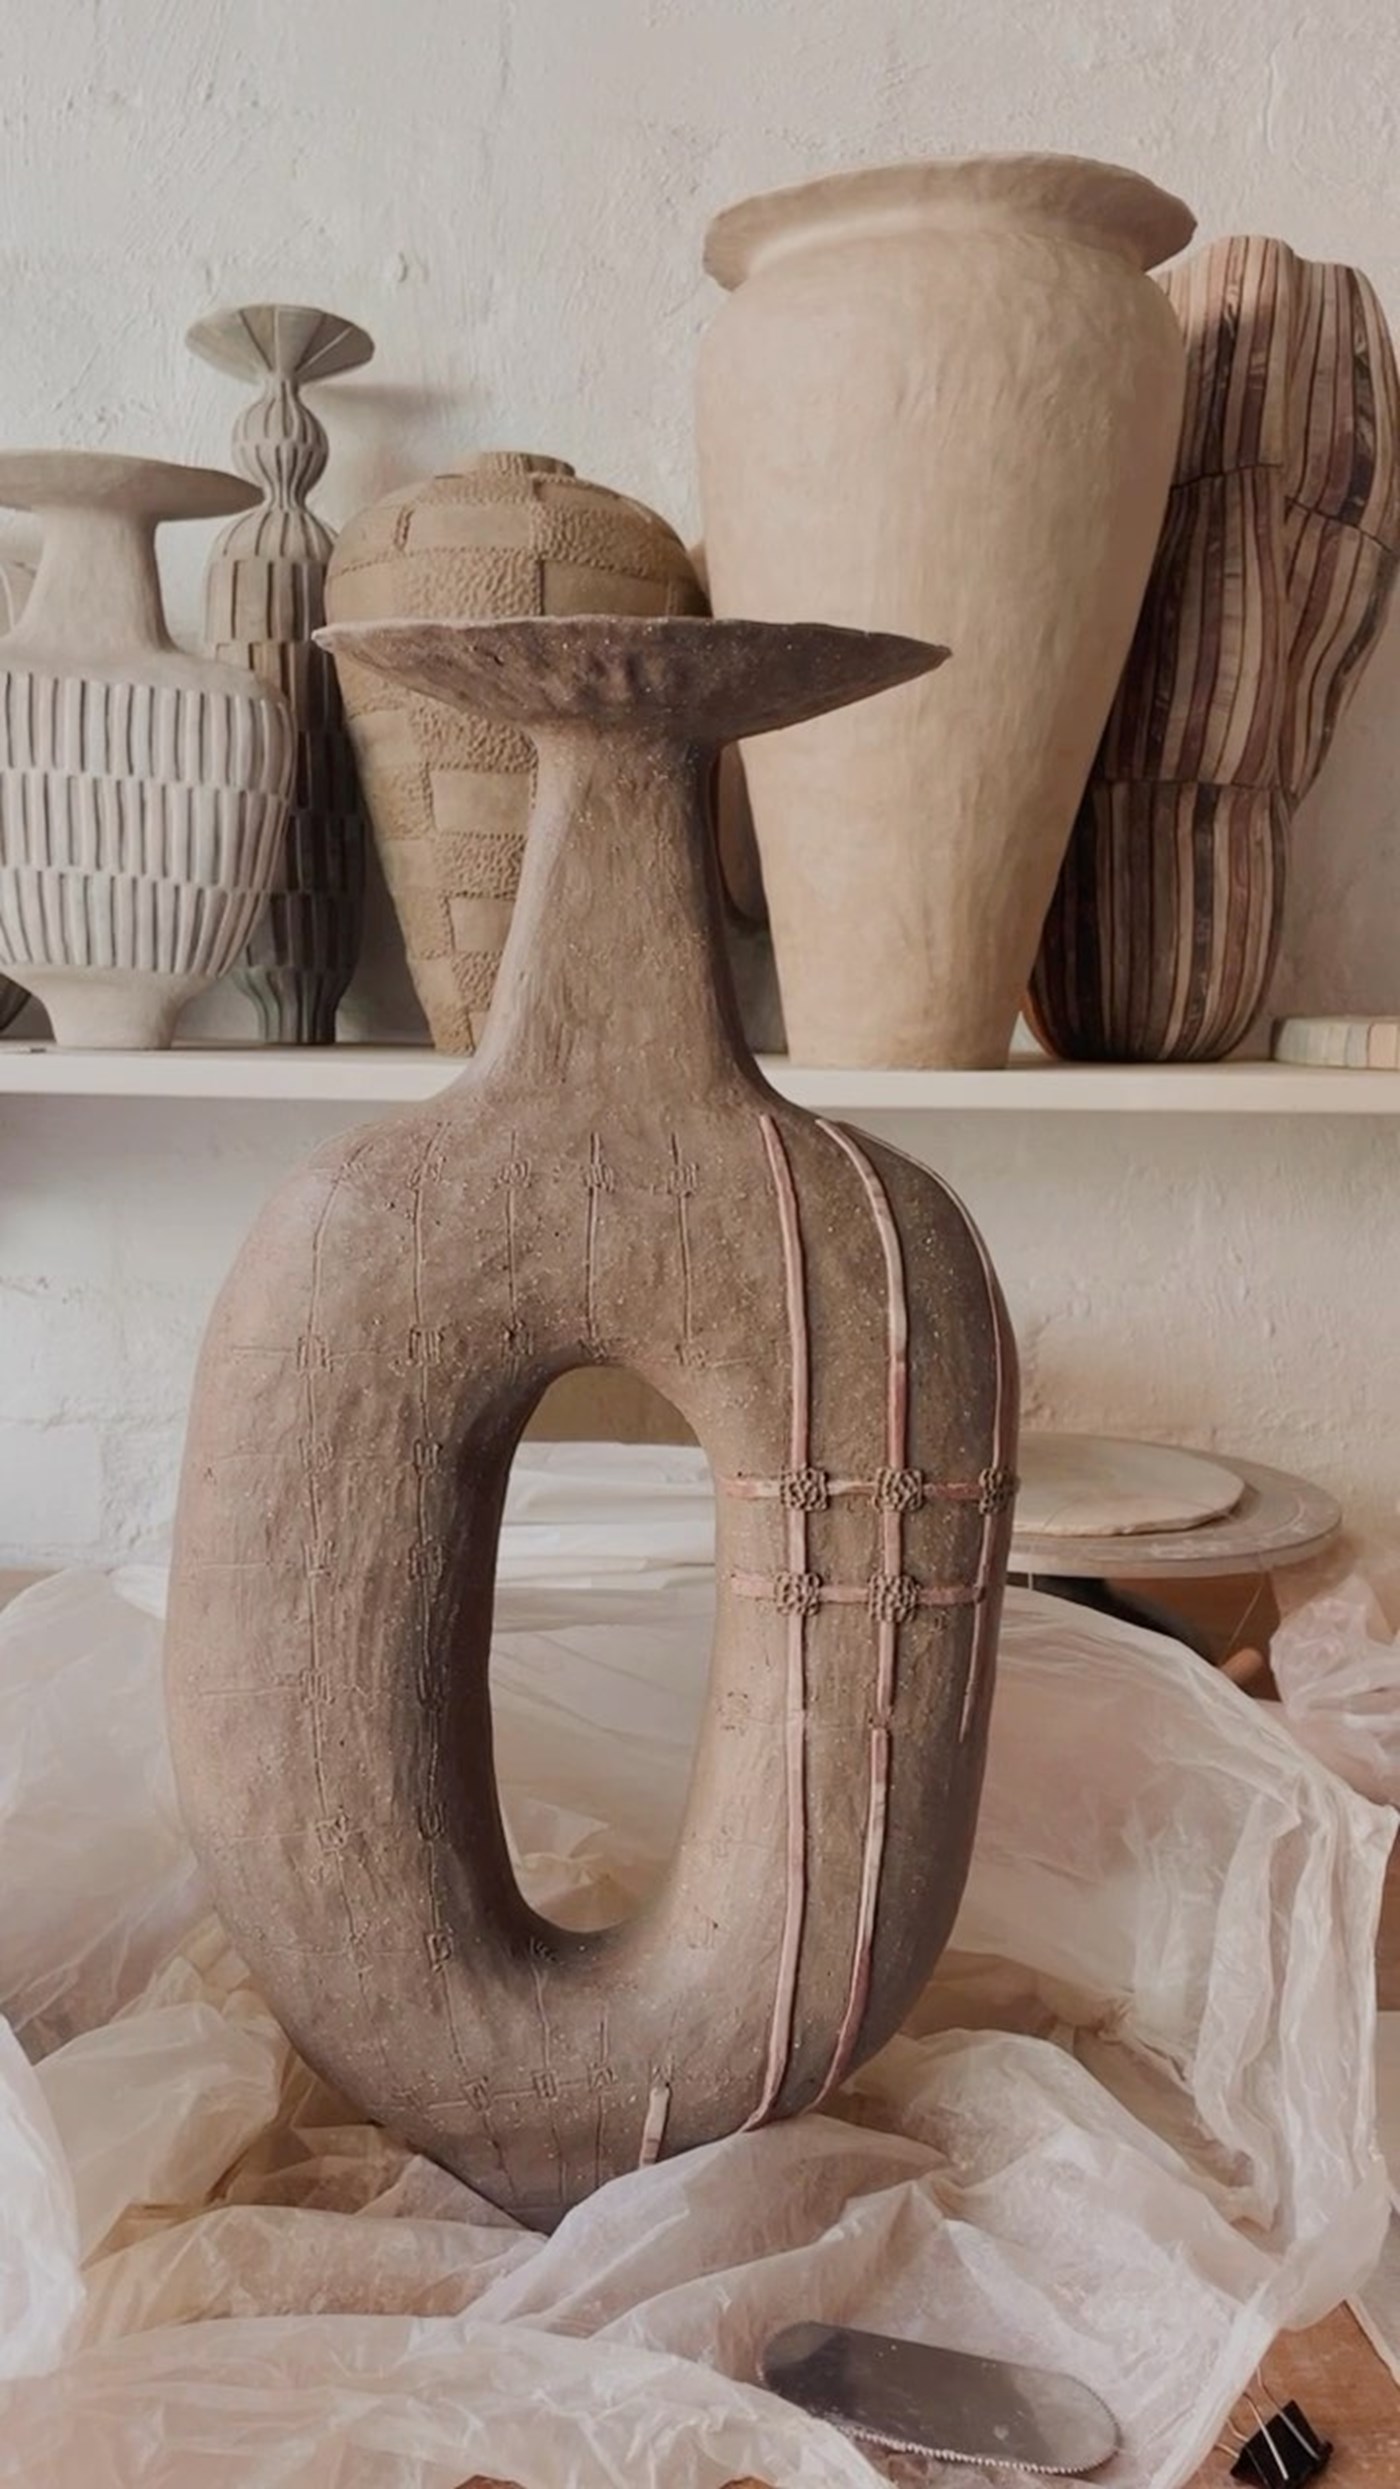 A large raw clay vessel with a hole in the centre and a fanned out top. Other similar vessels are visible in the background 